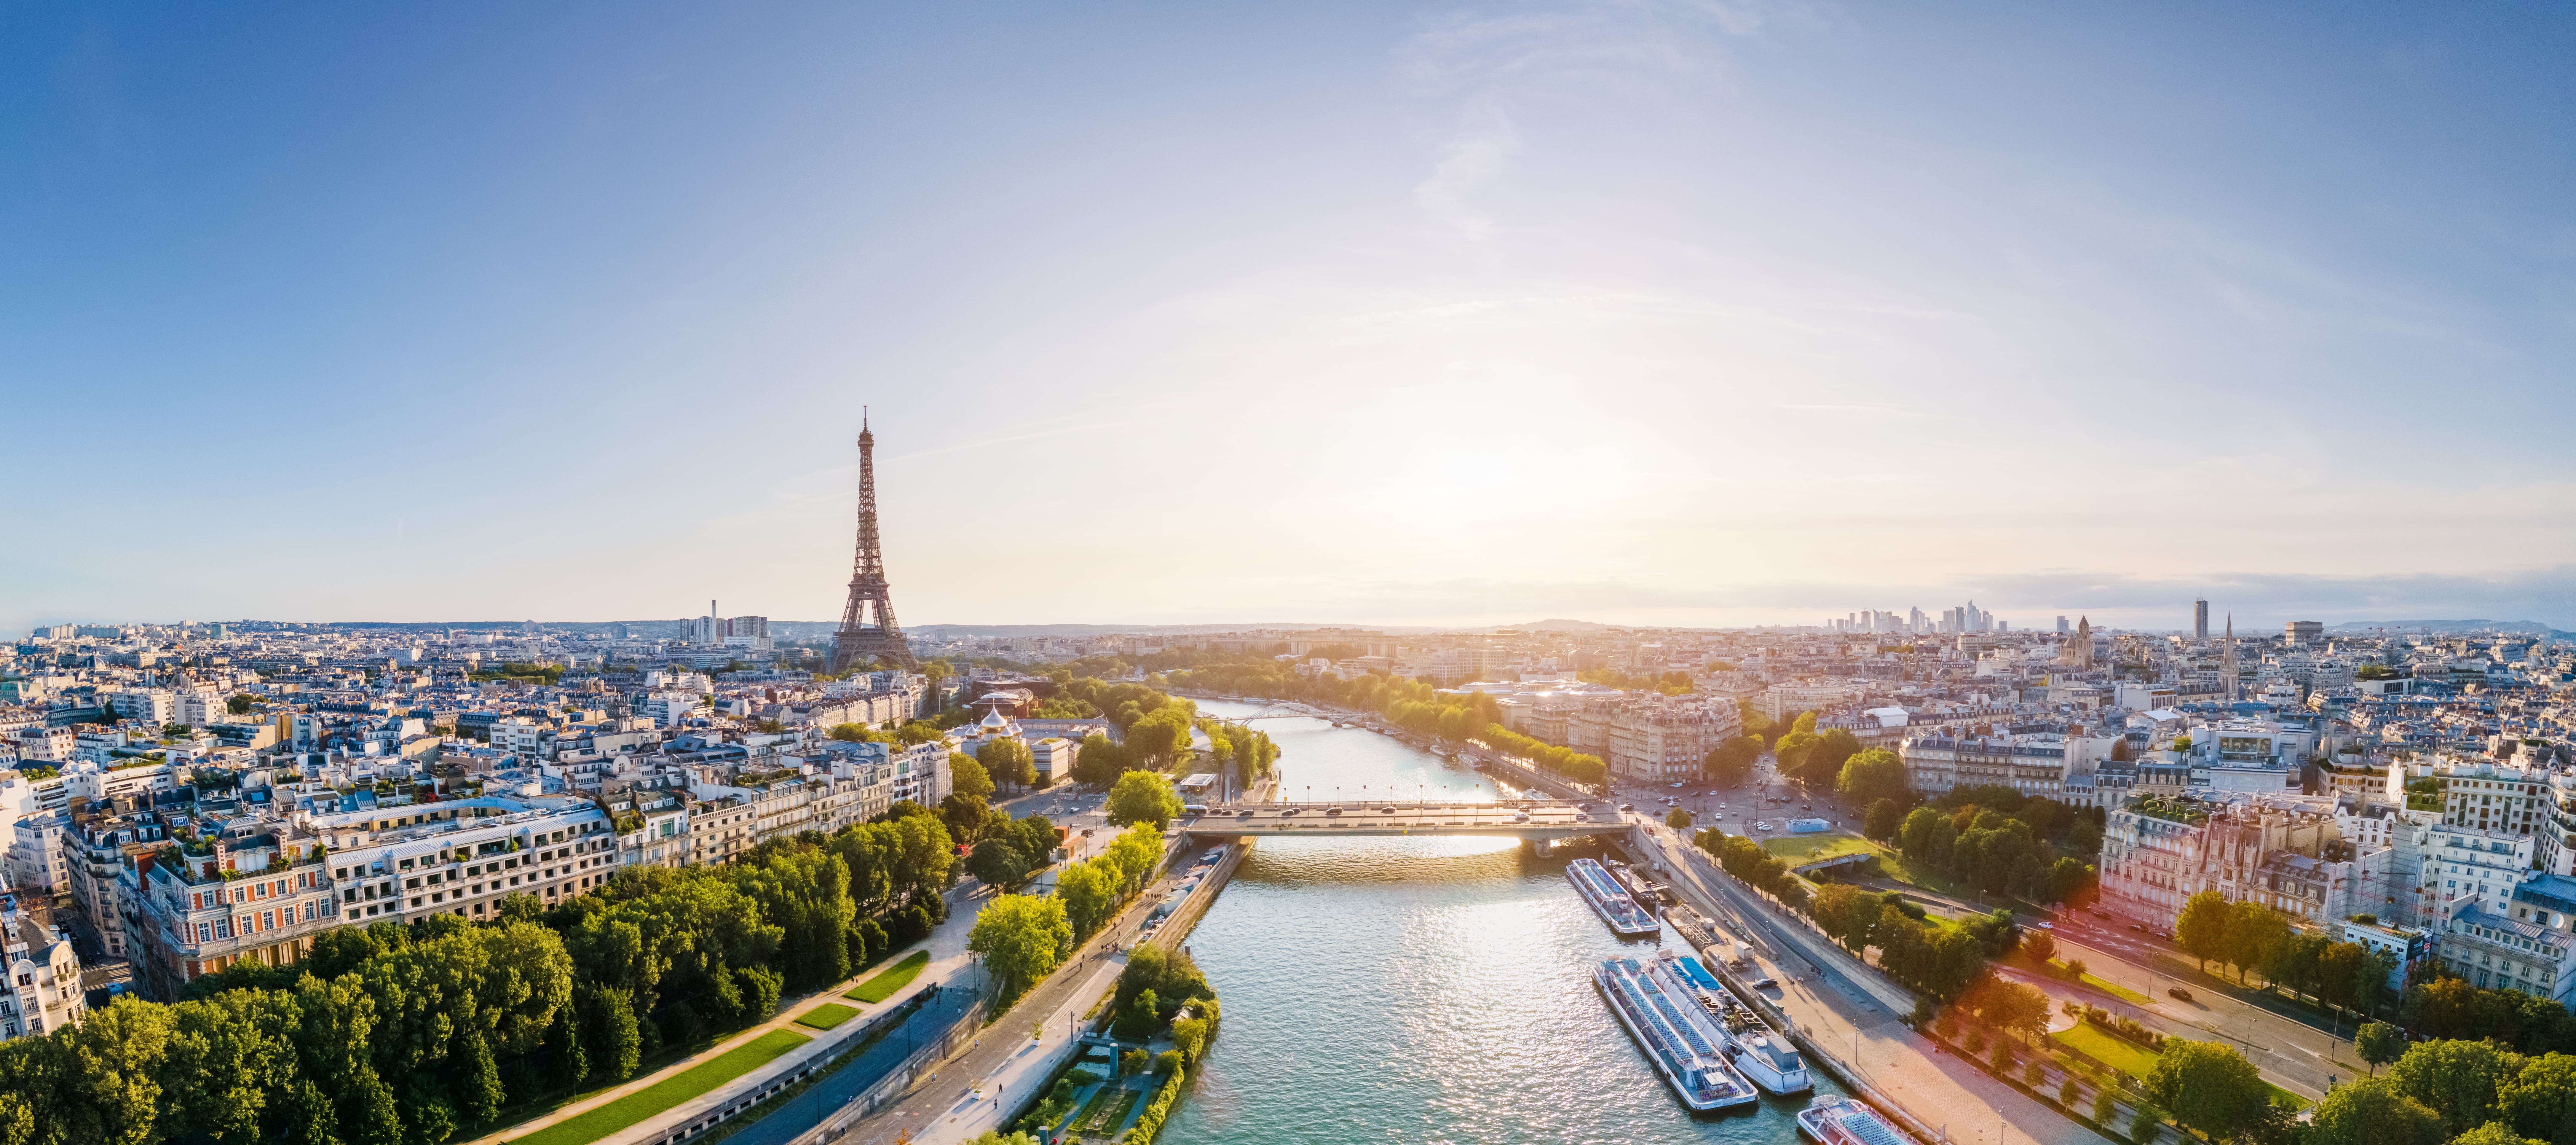 How Leapfrog Geothermal is helping define the Paris Basin’s energy future